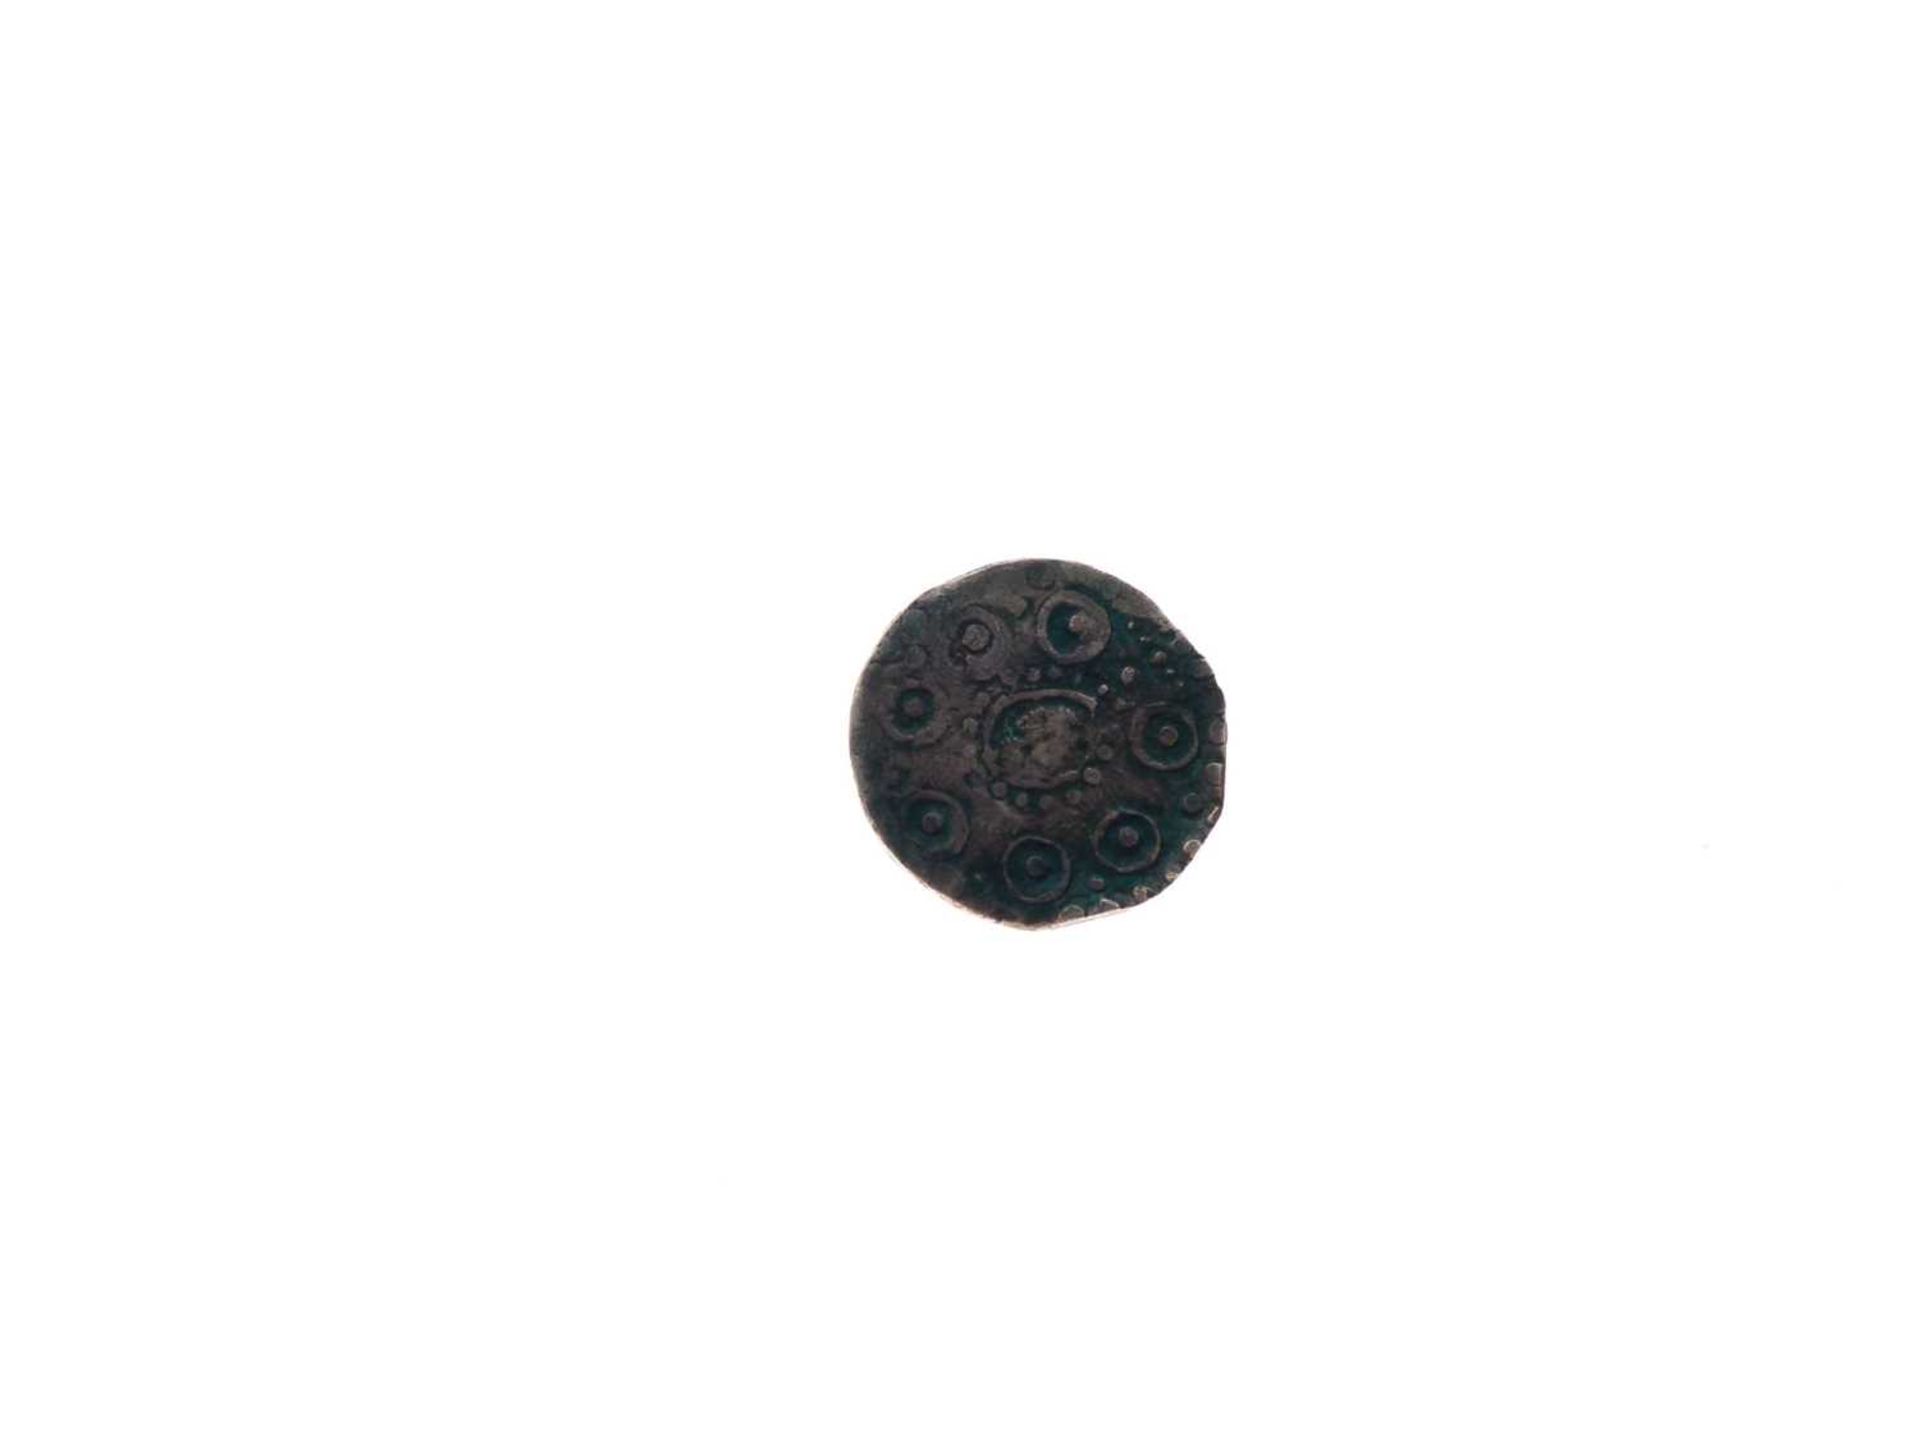 Early Anglo-Saxon Period 'Wodan' head coin - Image 7 of 7